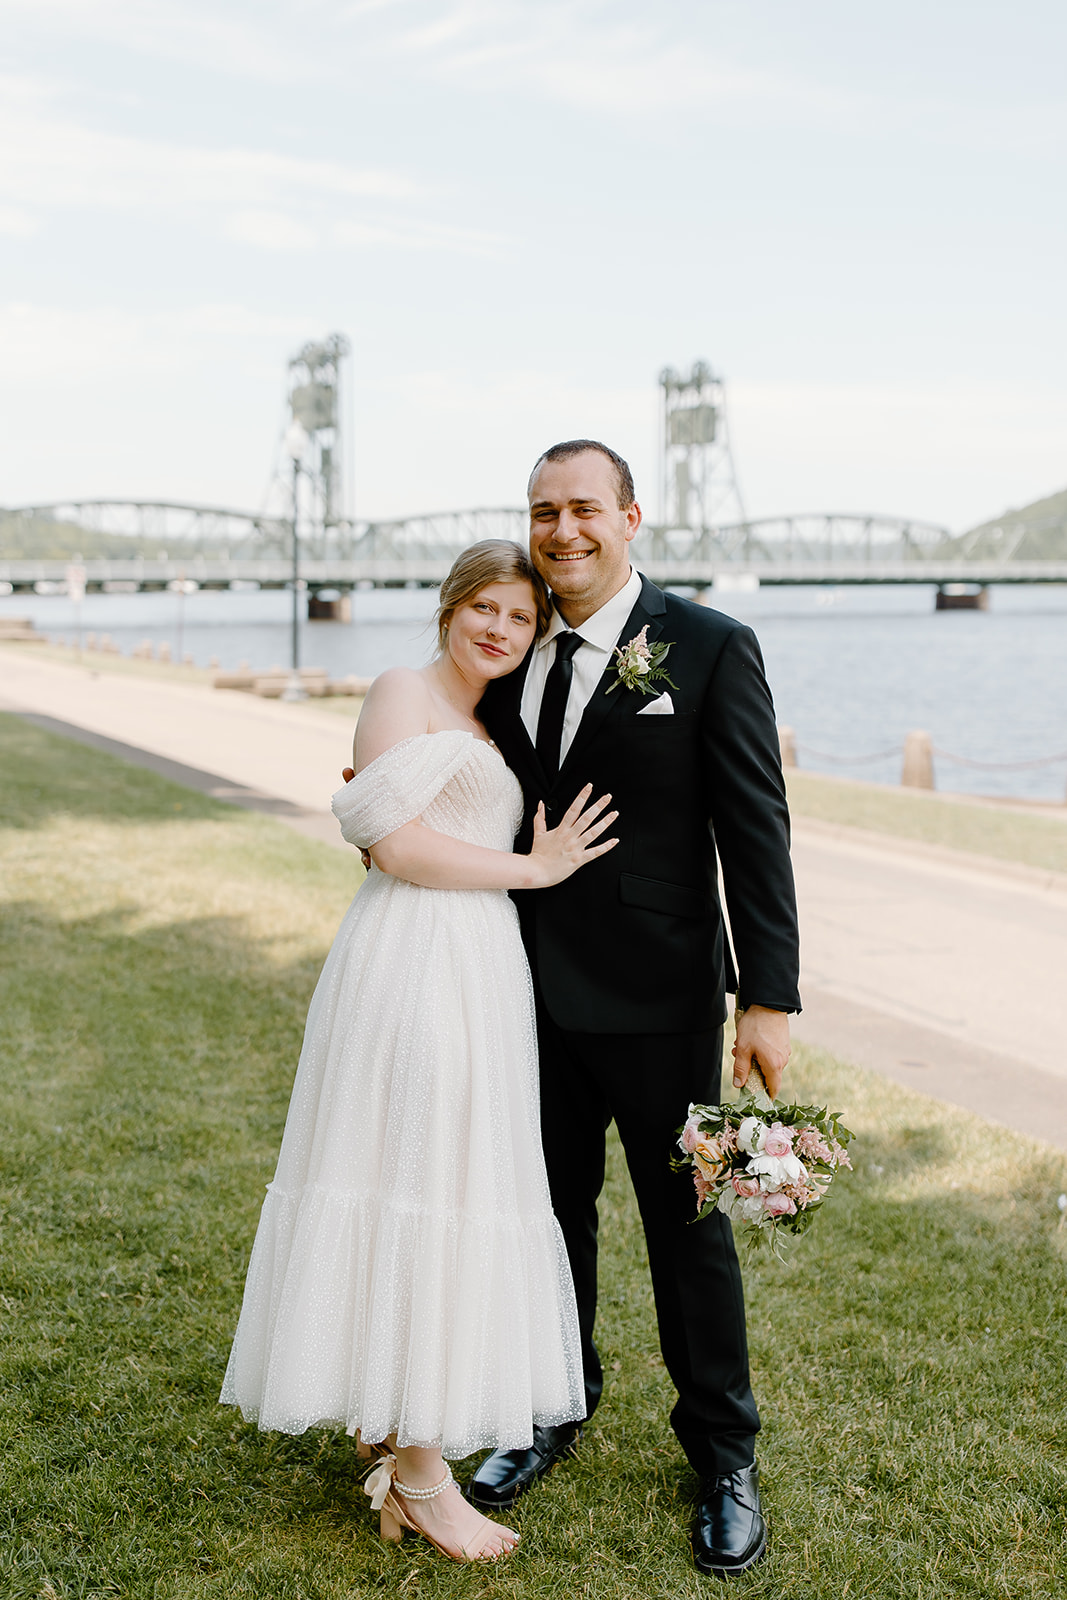 Bride and groom smiling in front of a lift bridge on the St. Croix river